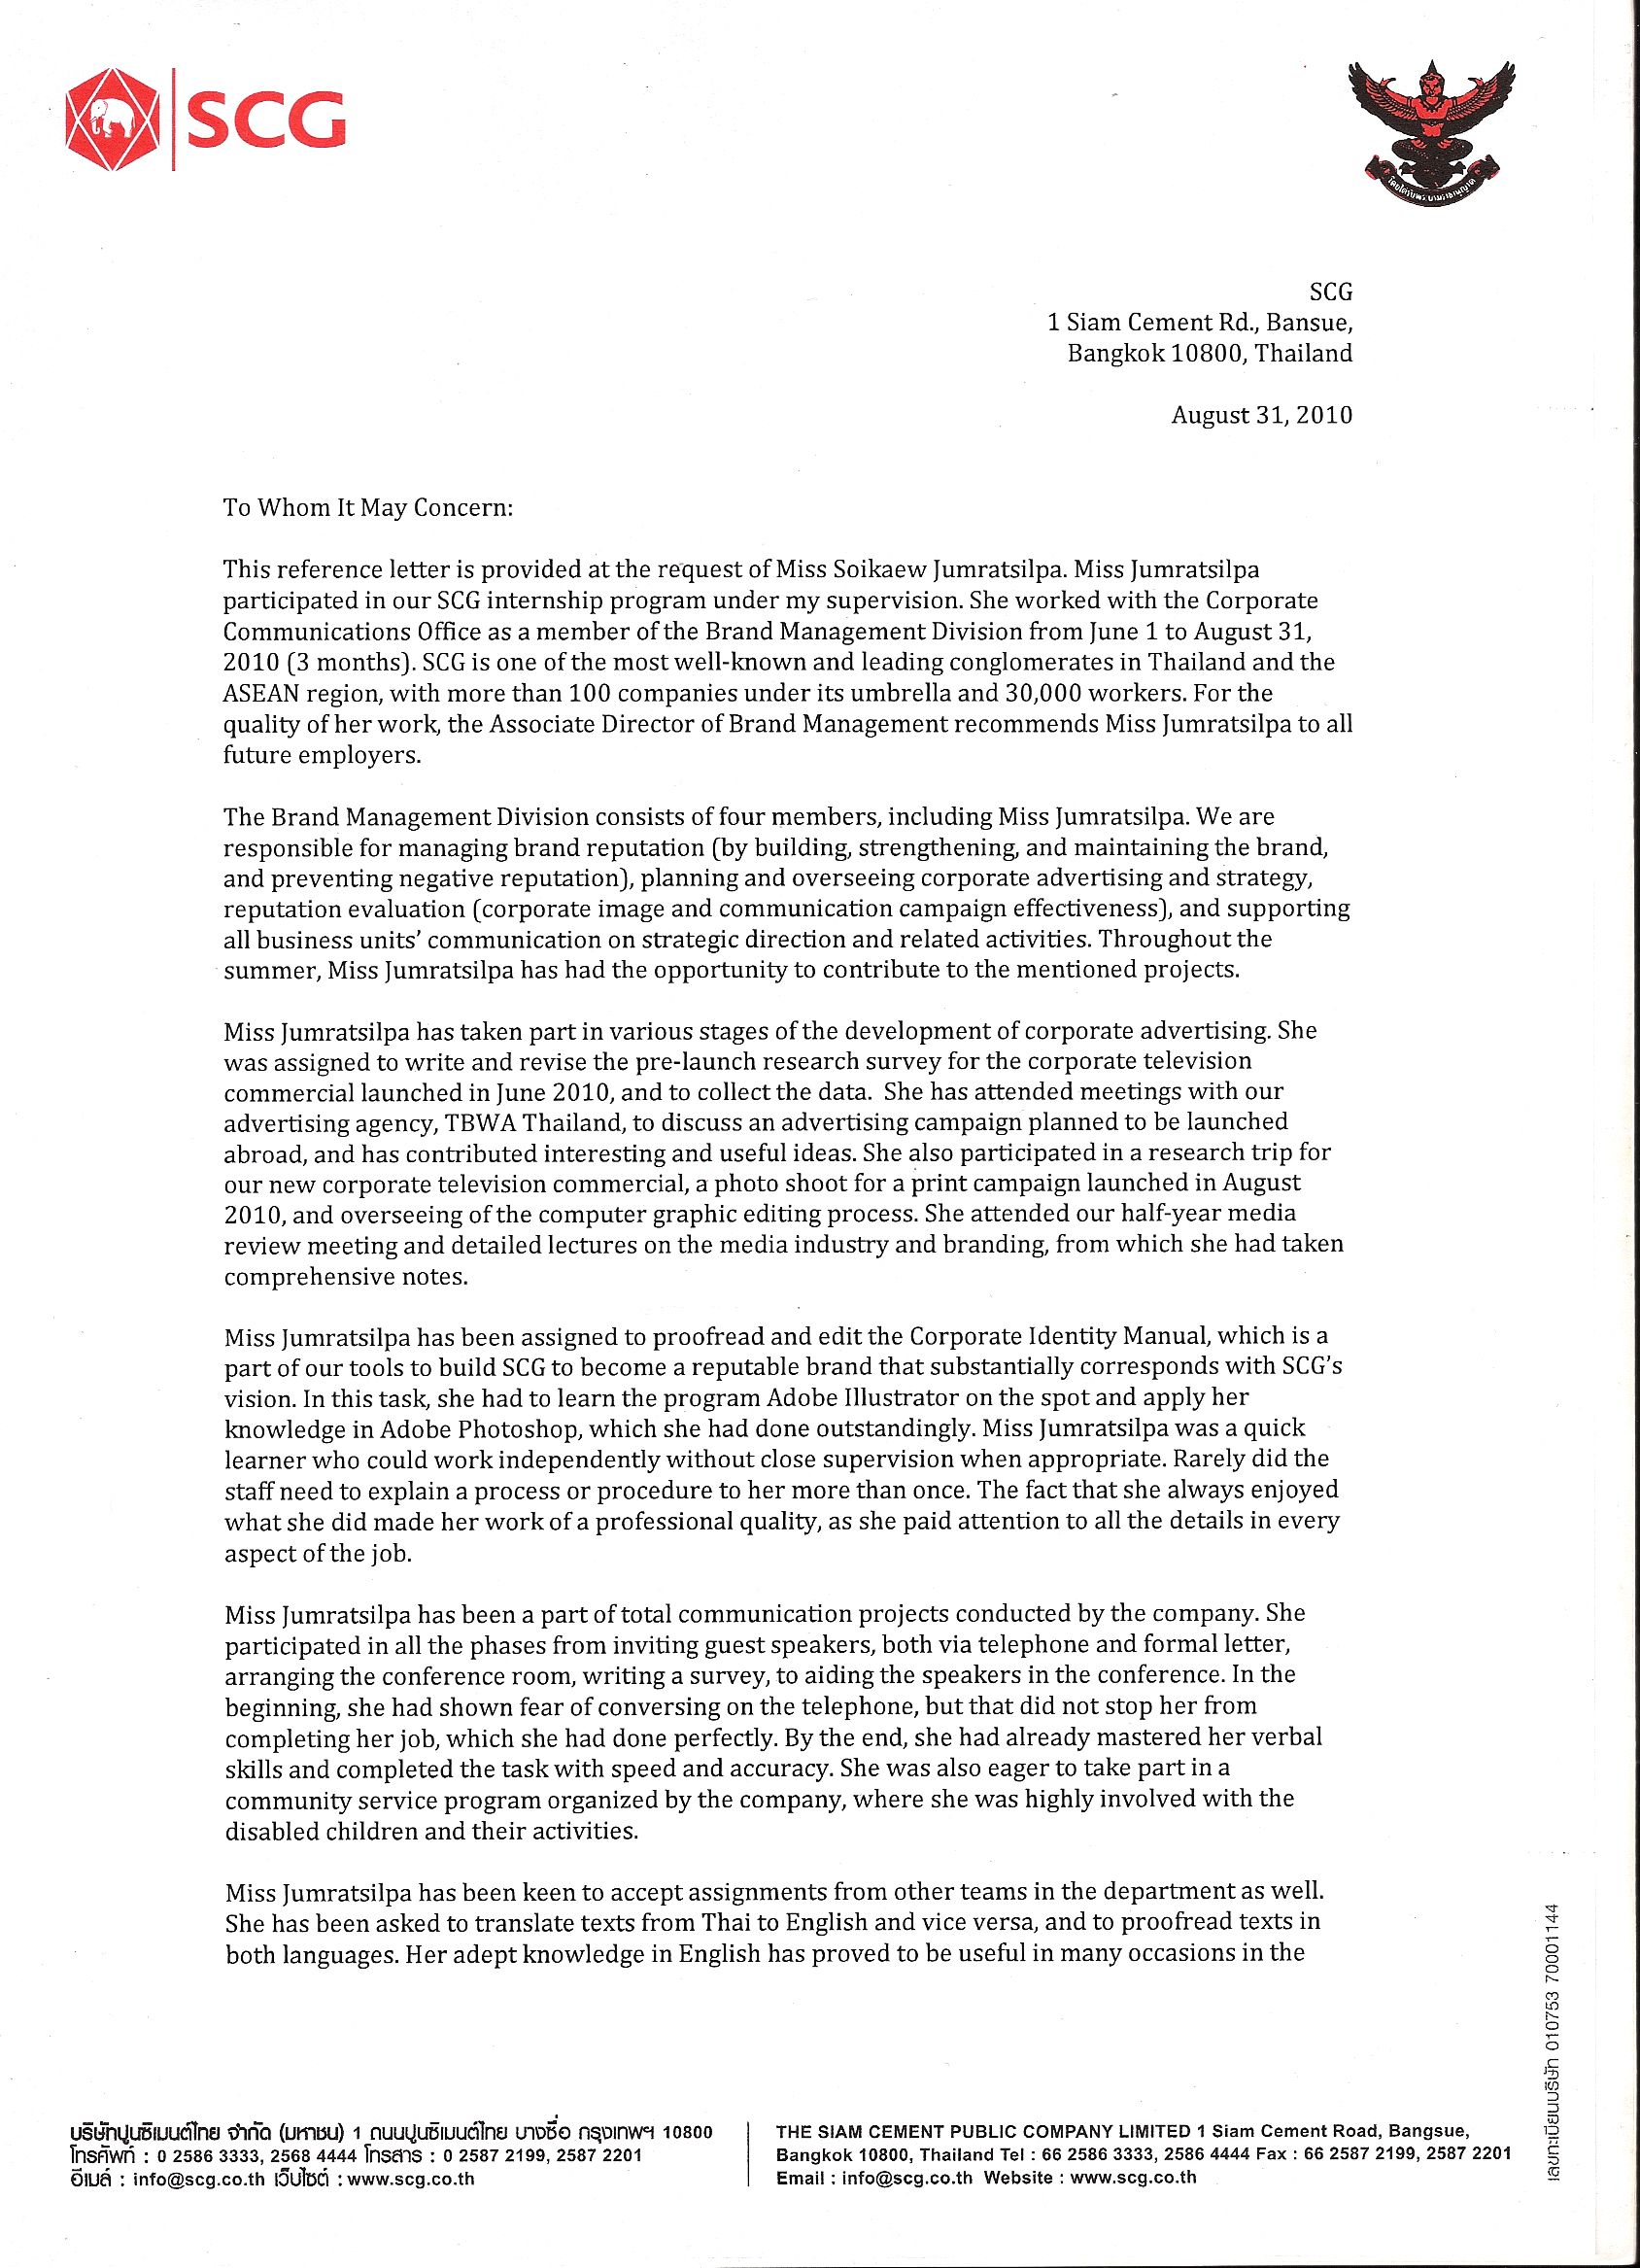 Letter Of Recommendation Hd Desktopwriting A Letter Of for size 1688 X 2334